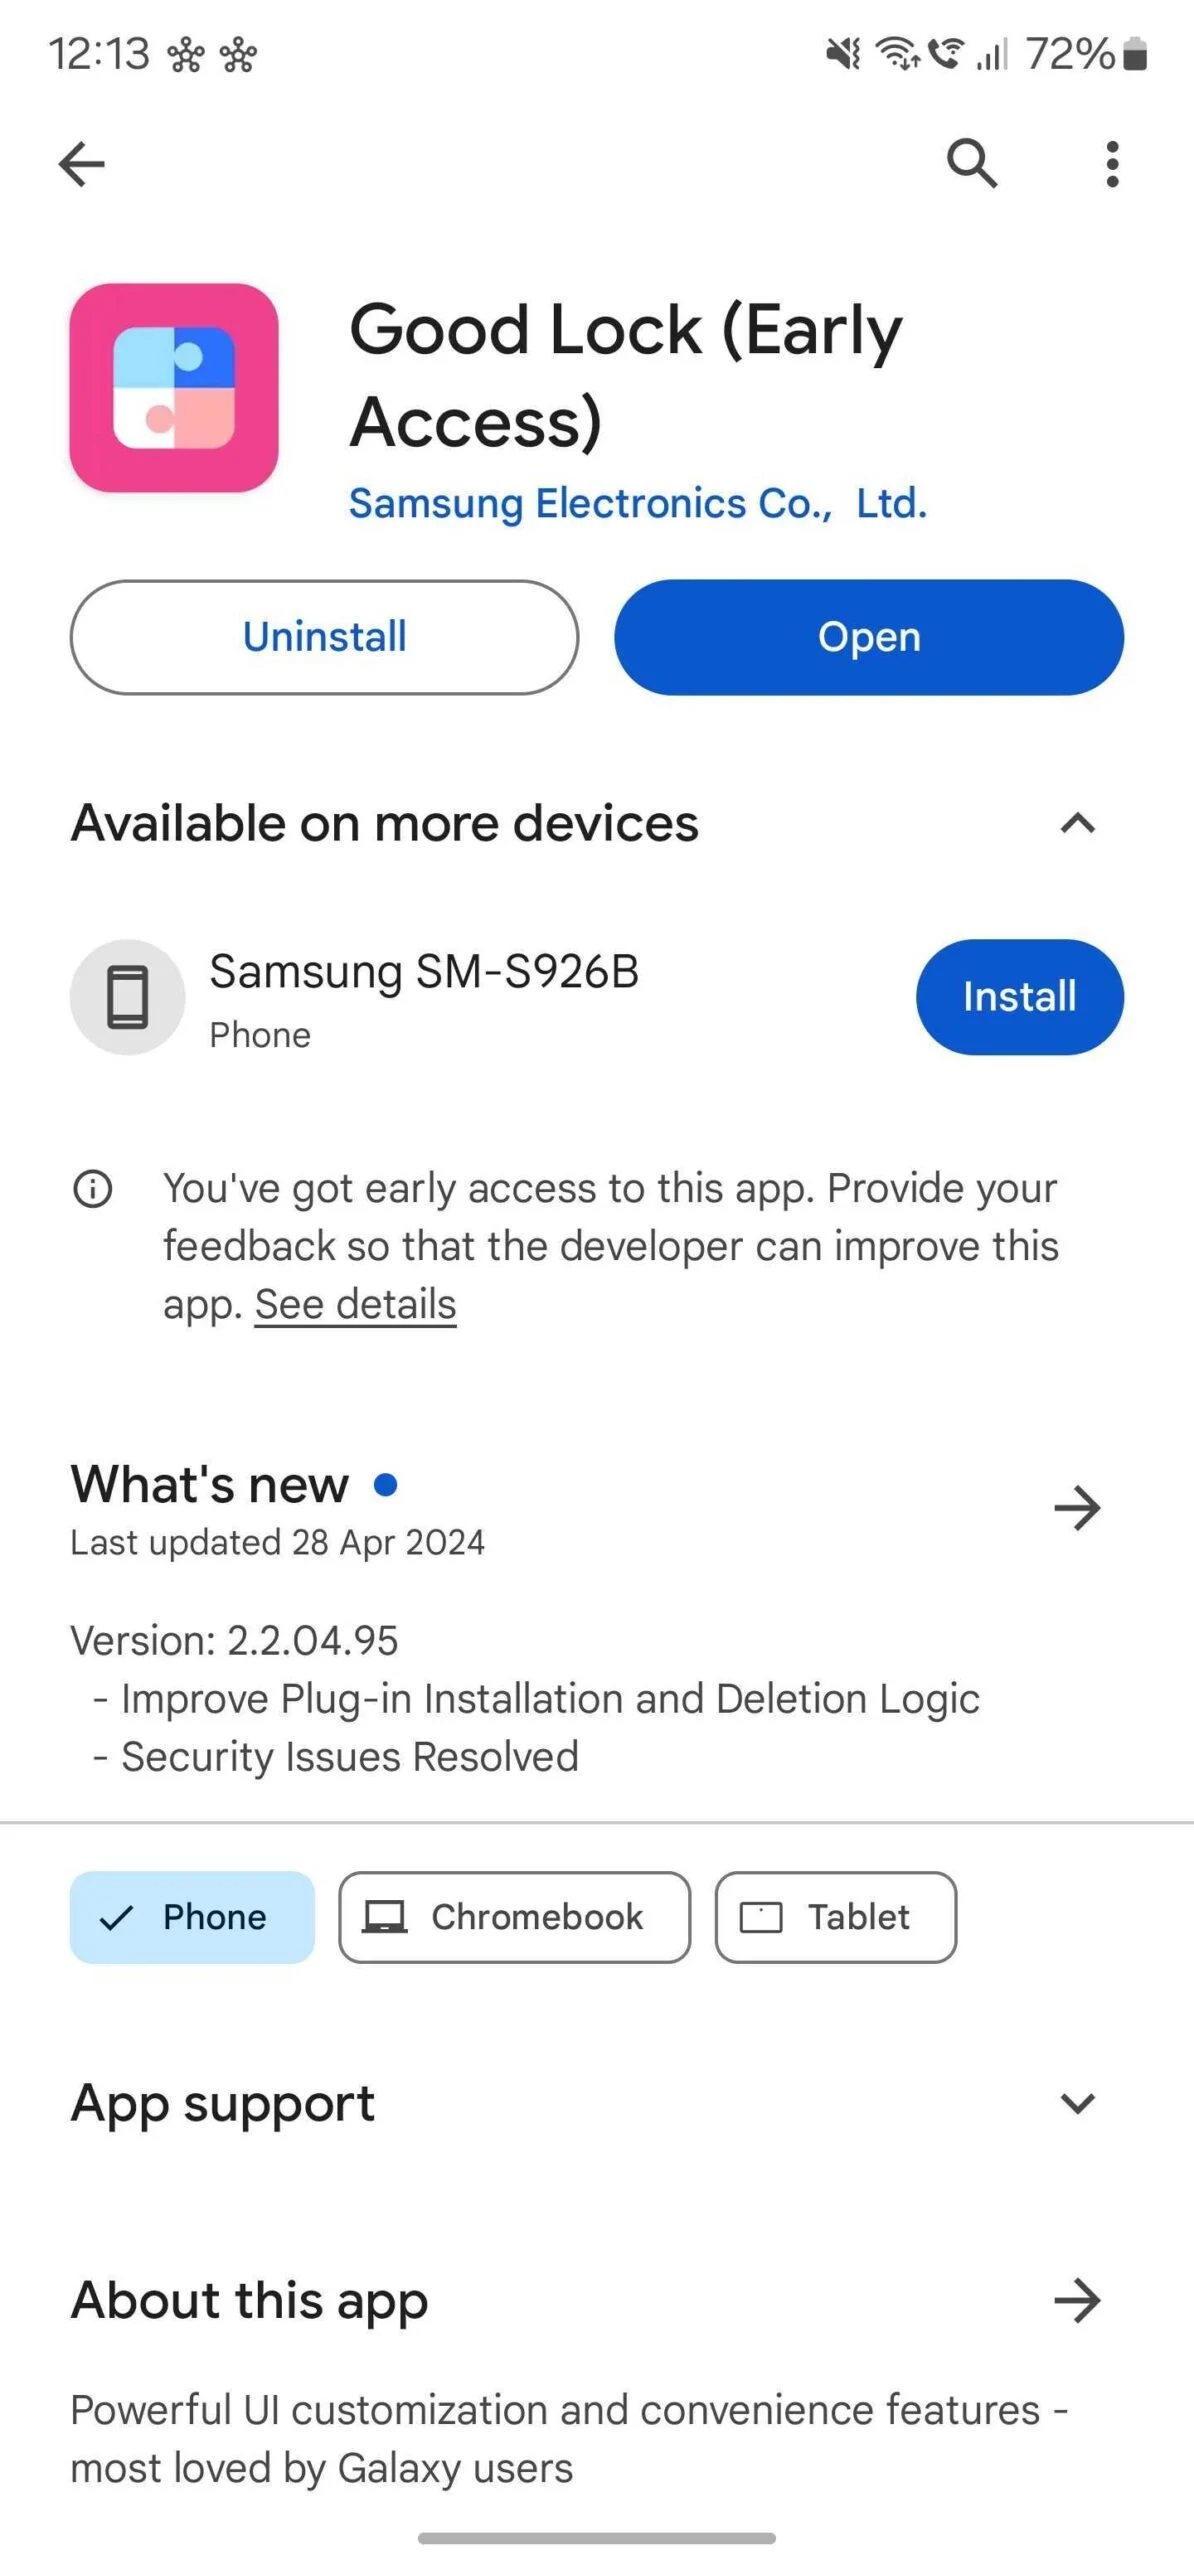 Samsung's Good Lock app comes to the Play Store